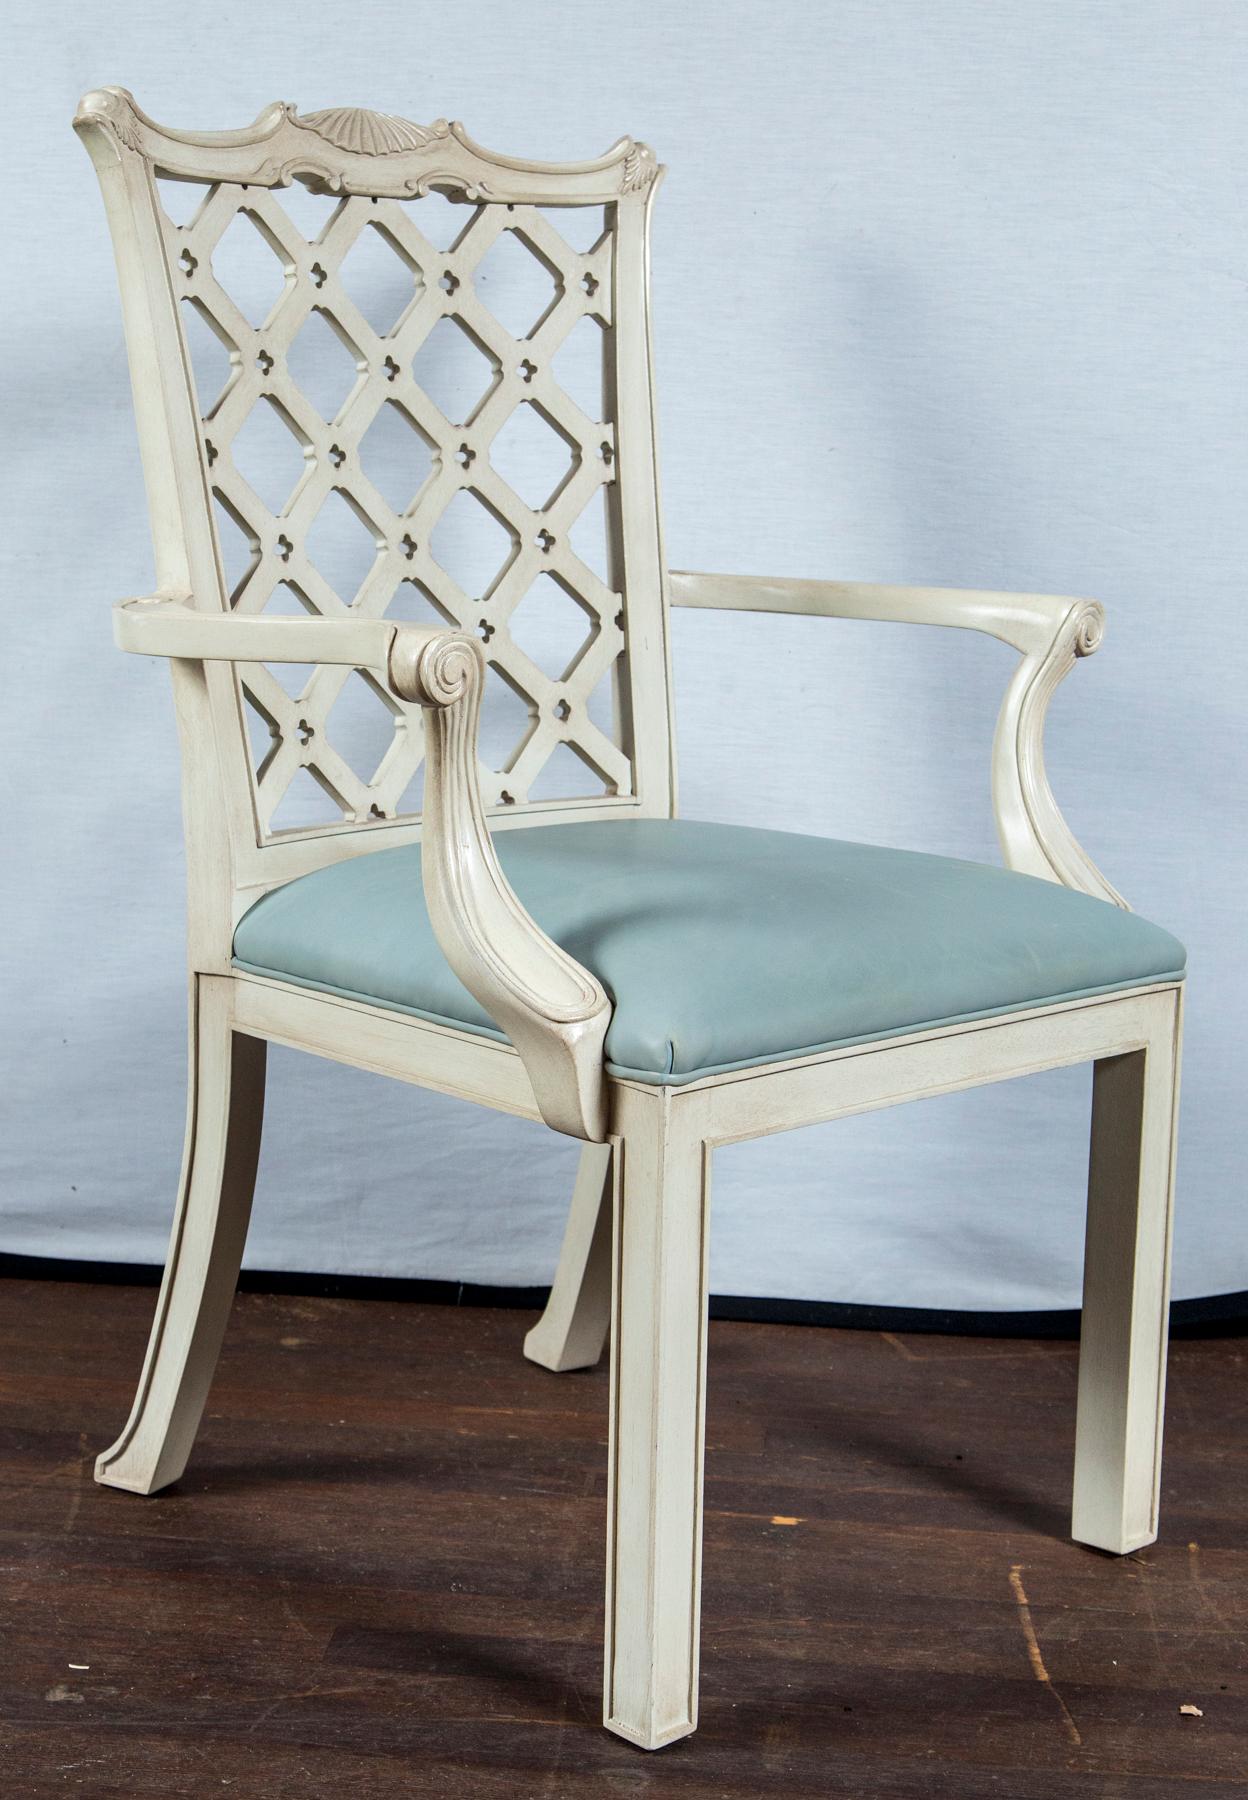 20th CENTURY Hickory Chair Co. Chinese Chippendale style dining chairs with lattice back, original white paint finish wood, robin's egg blue leather seats. 2 arm chairs, 10 side chairs. Lattice backrest topped with pagoda - form crest rail.